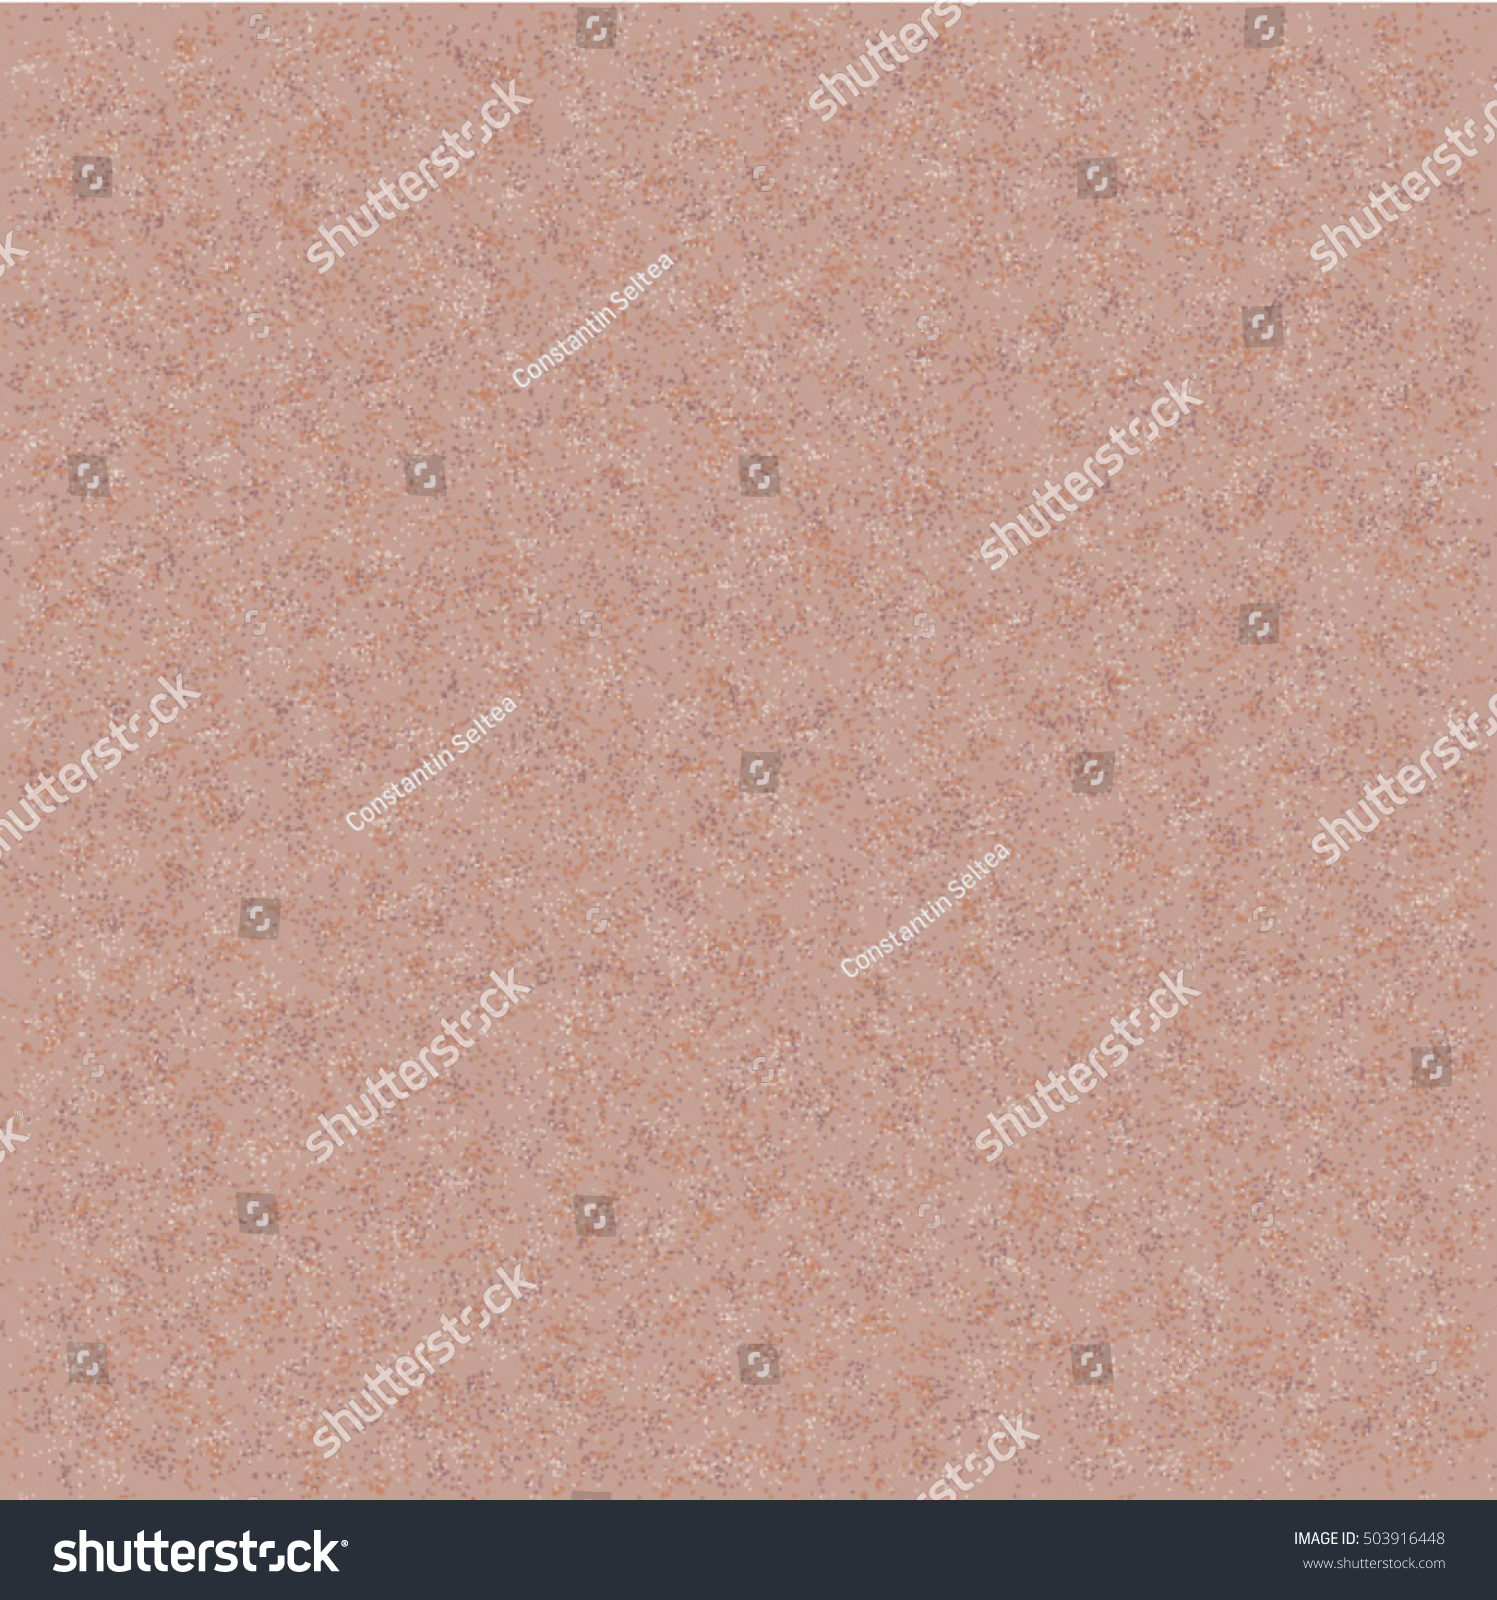 Sand Paper Texture Cardboard Stone Surface Stock Vector 503916448 ...